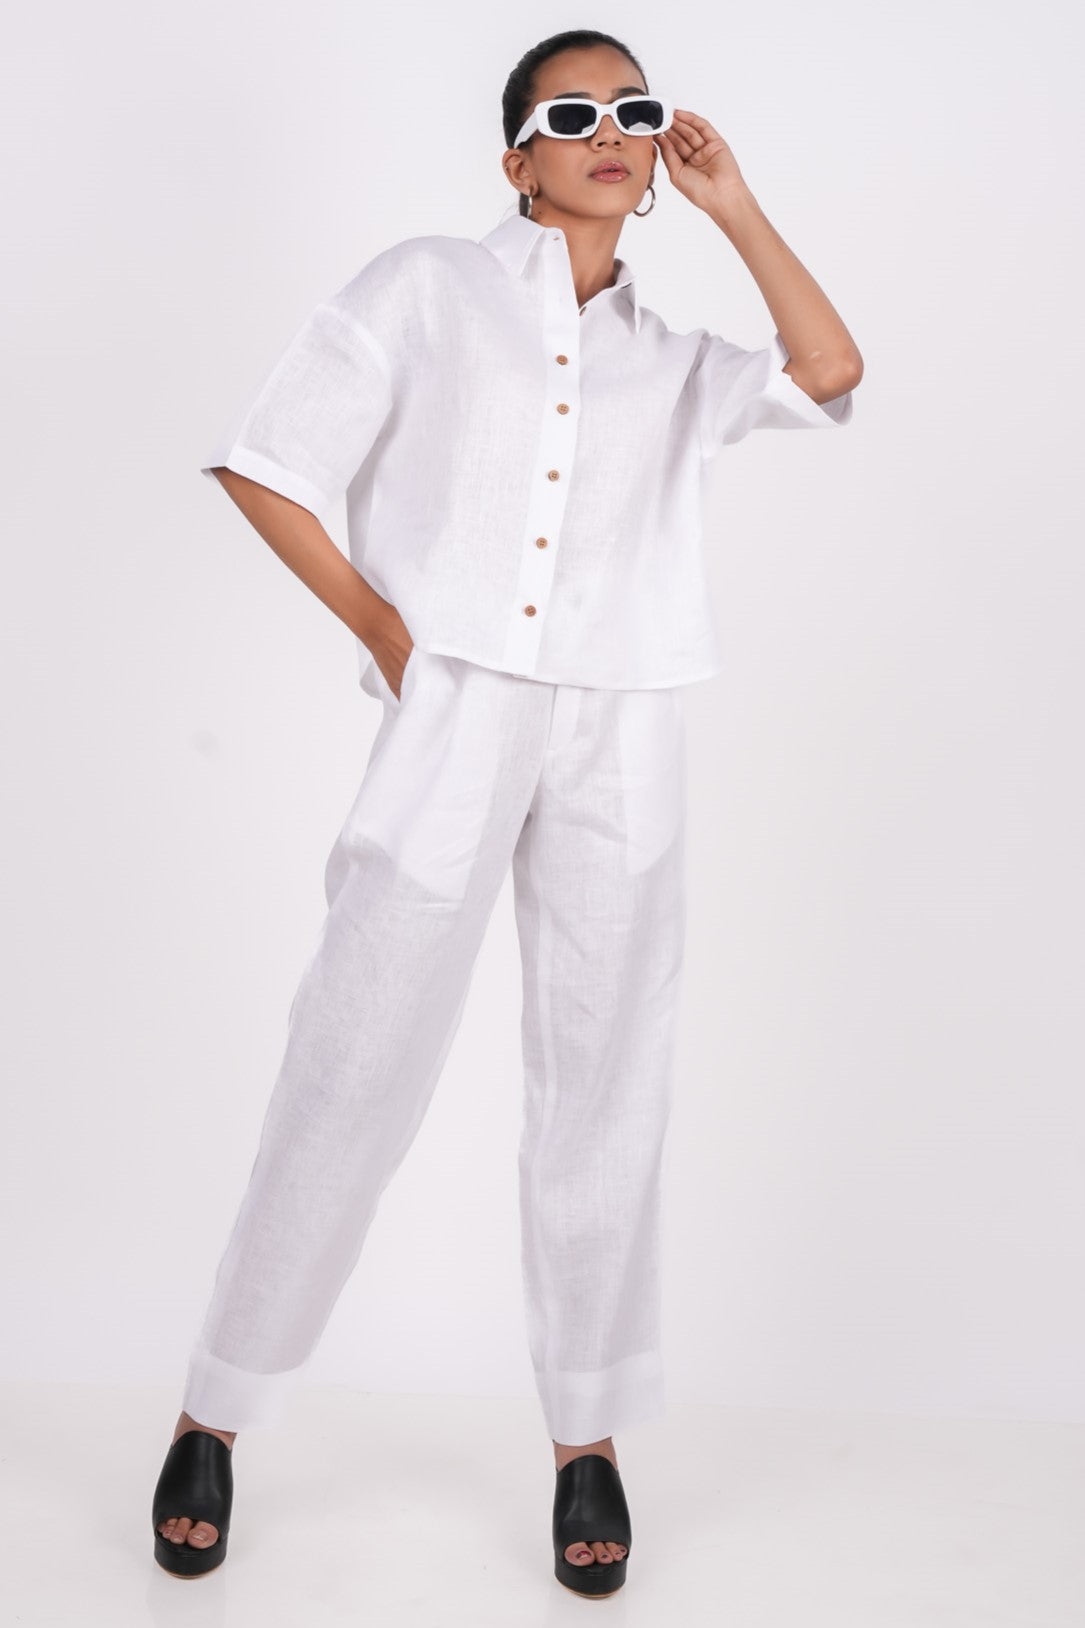 Pearl White Co-ord Set- Includes Pair of Shorts and Chinese Collar shirt